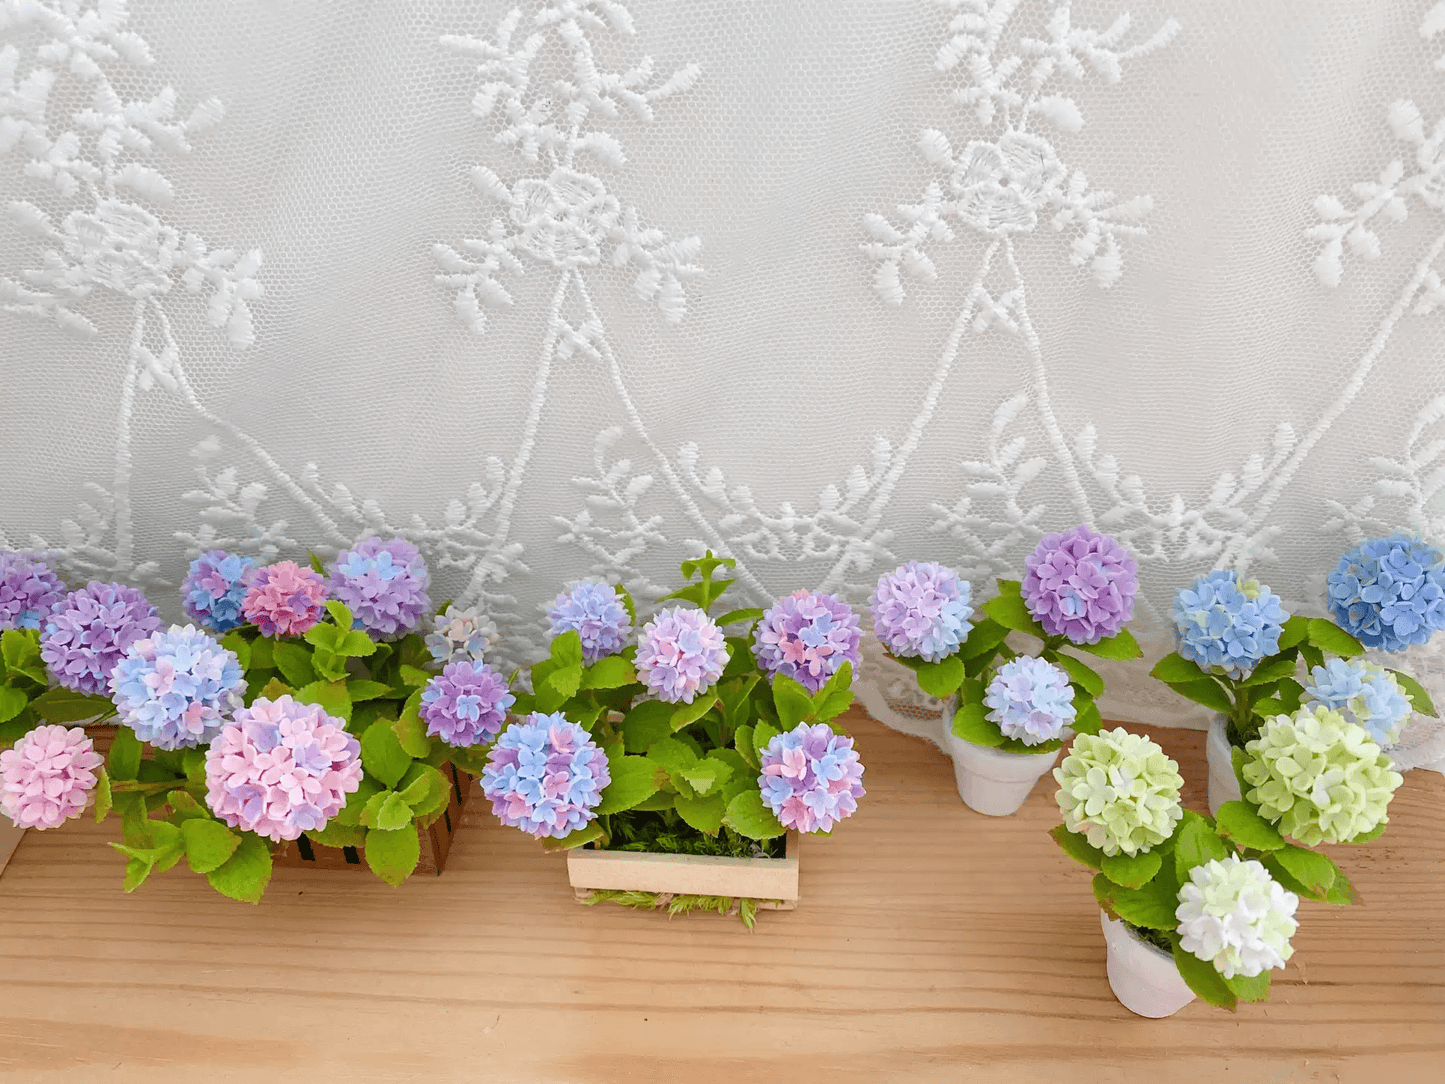 Hydrangeas are deciduous shrubs with flowers in terminal, round or umbrella-shaped clusters in colors of white, pink, or blue, or even purple.  Dollhouse Garden Plants Handmade from Clay.